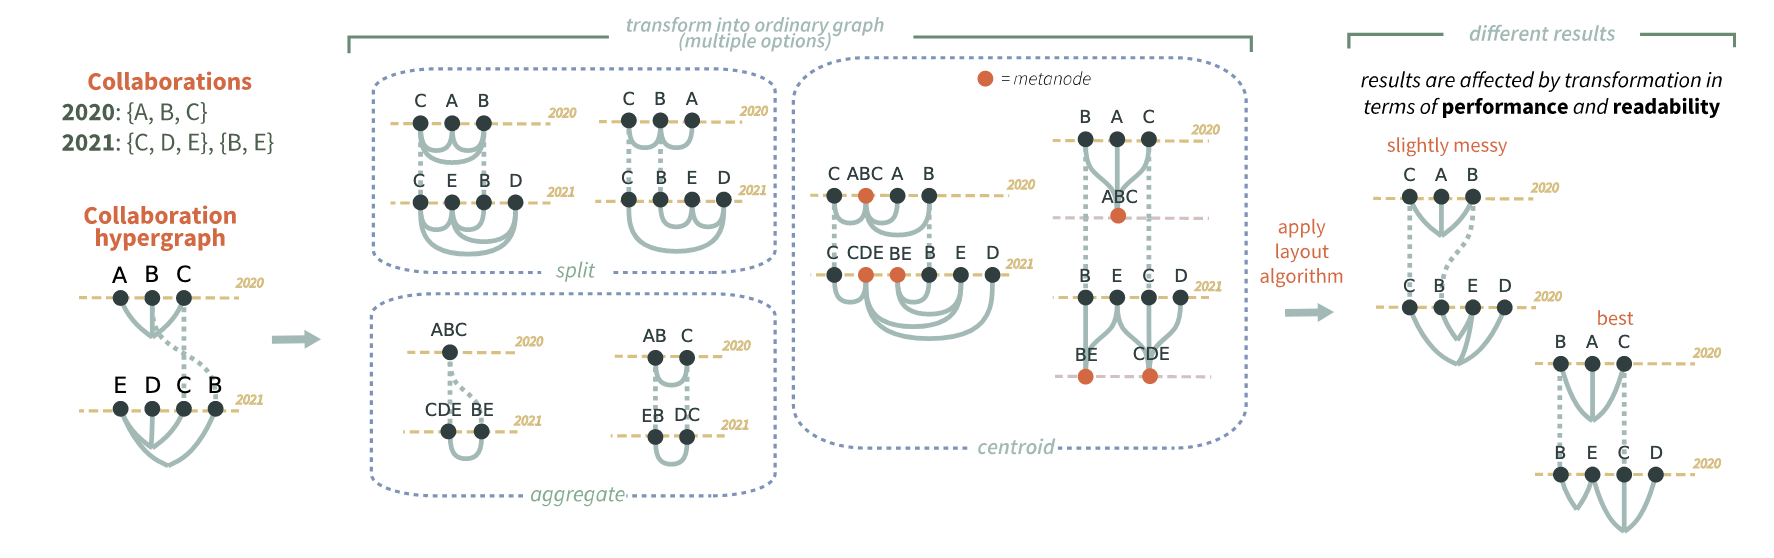 A picture showing the process of applying a graph layout algorithm to a hypergraph